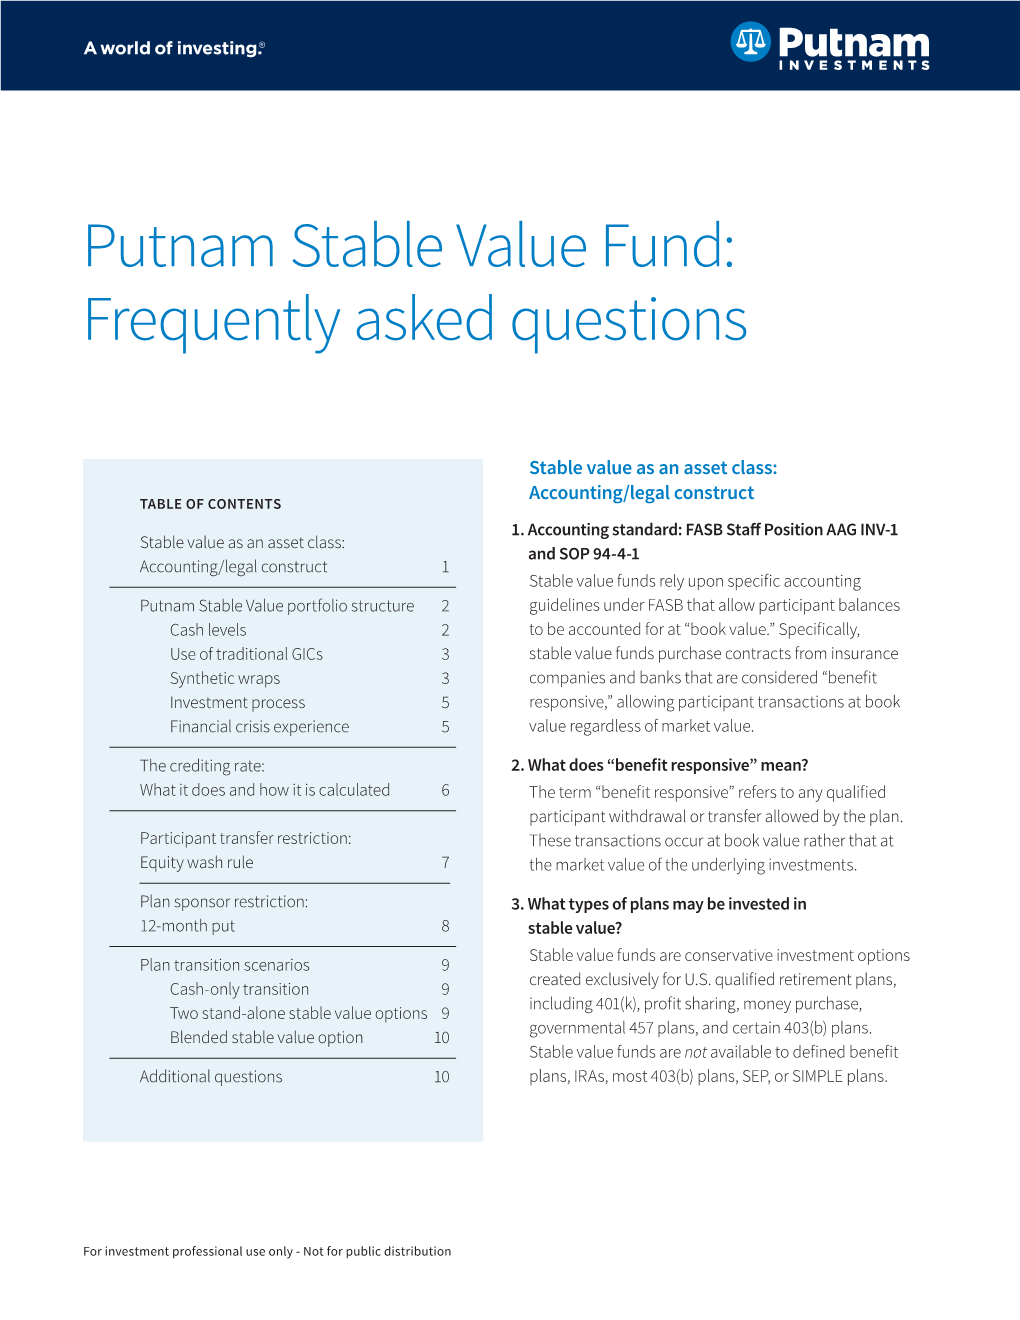 Stable Value Fund: Frequently Asked Questions